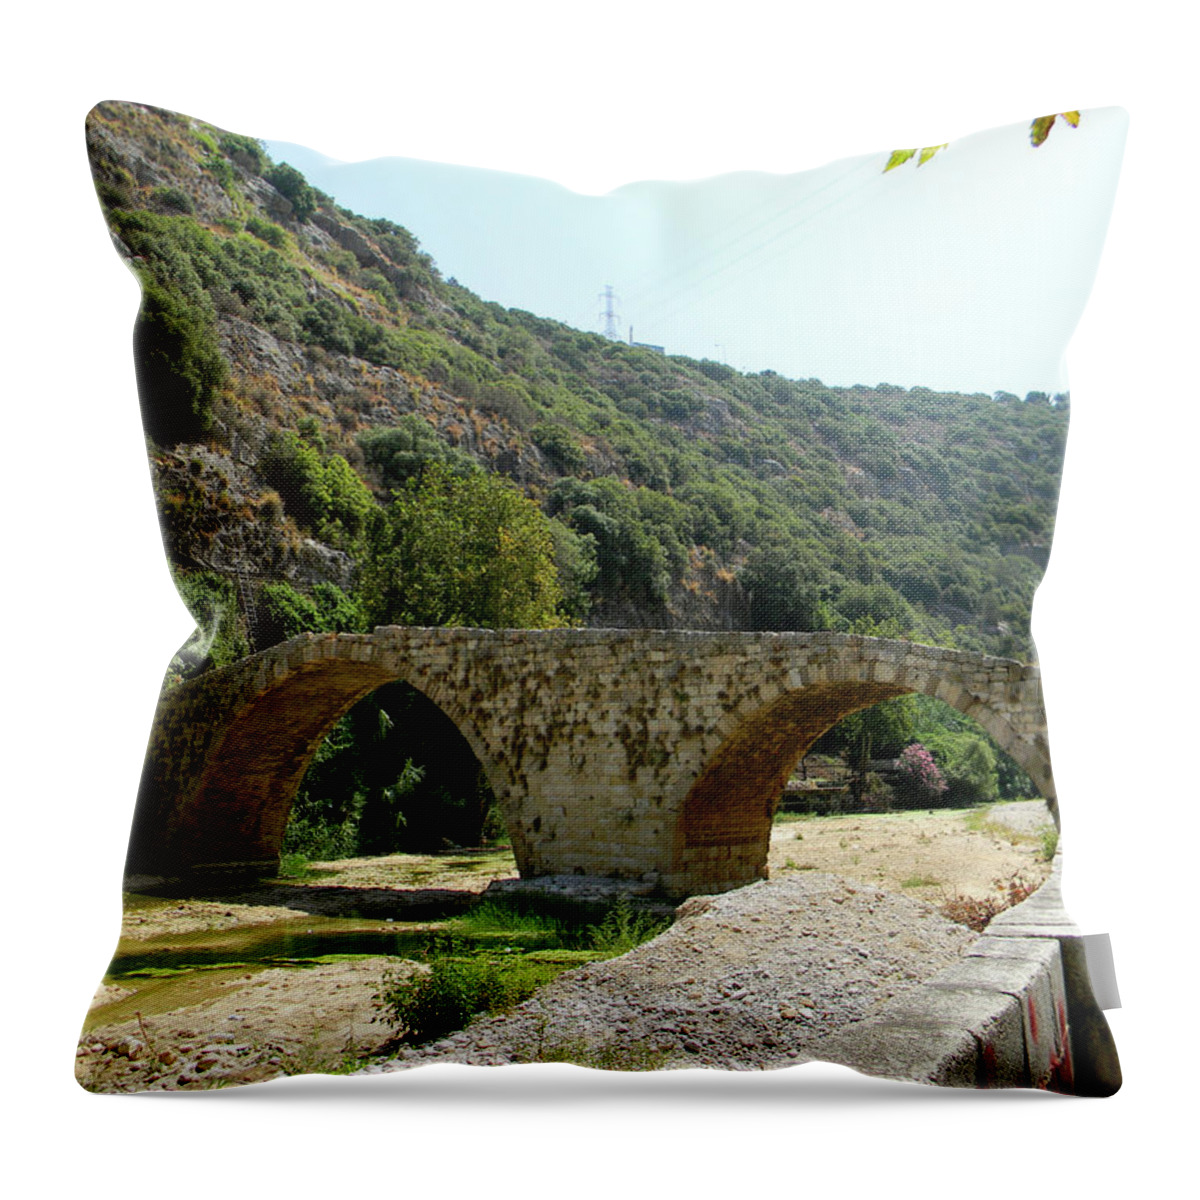 Lebanon. Dog River Throw Pillow featuring the photograph Dog River by Marwan George Khoury